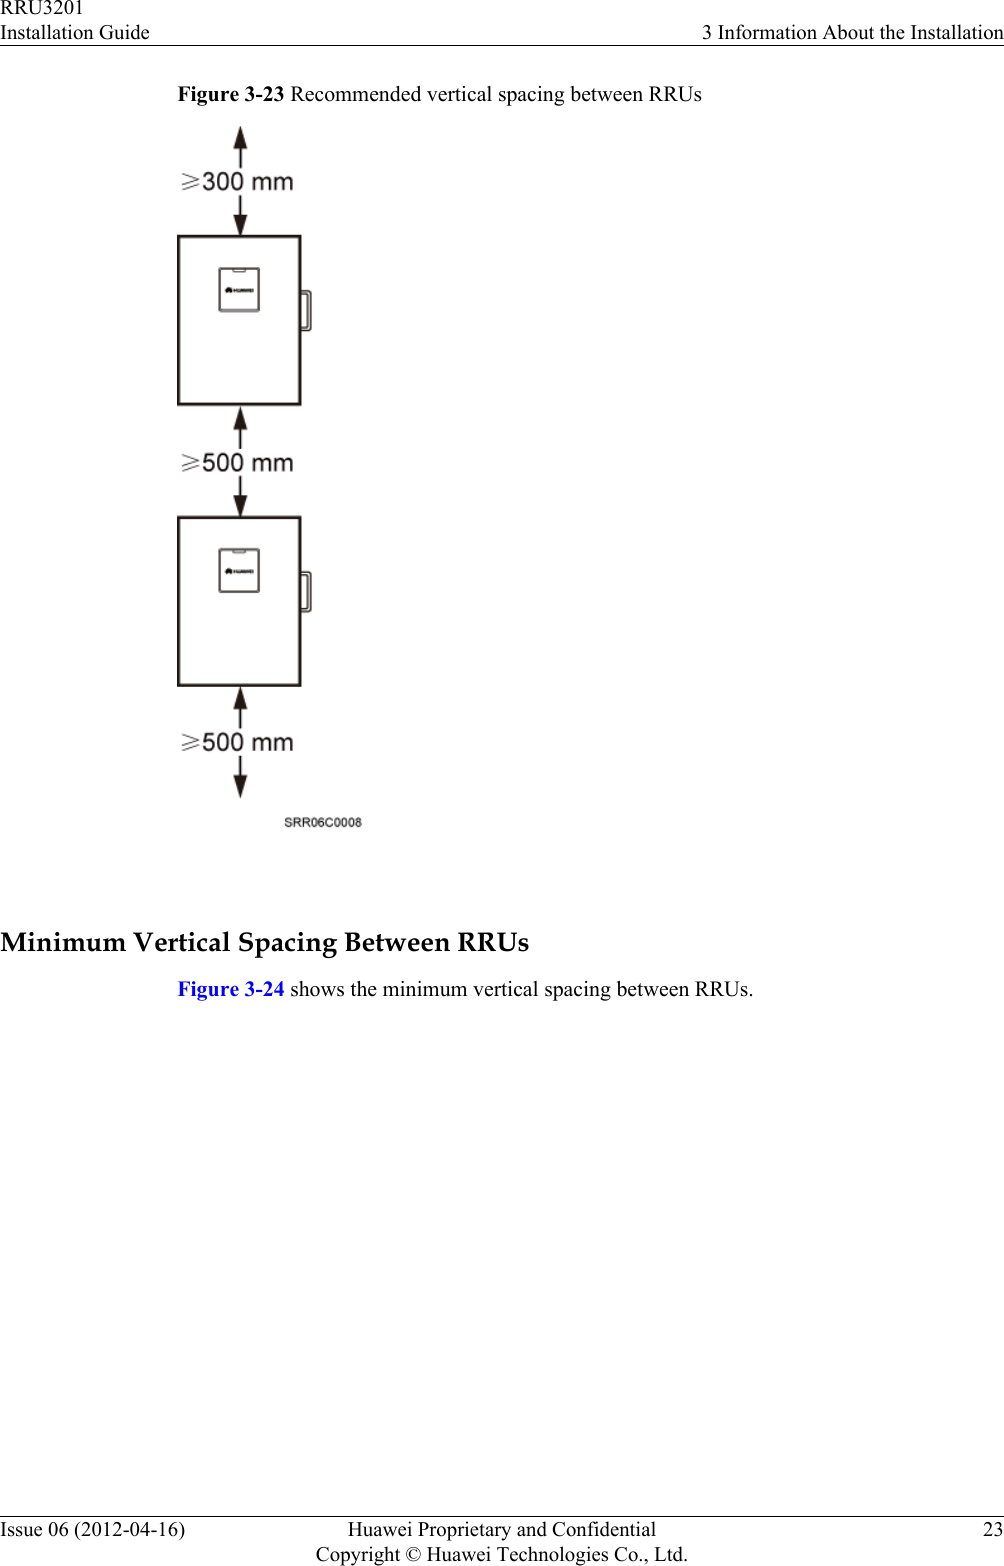 Figure 3-23 Recommended vertical spacing between RRUs Minimum Vertical Spacing Between RRUsFigure 3-24 shows the minimum vertical spacing between RRUs.RRU3201Installation Guide 3 Information About the InstallationIssue 06 (2012-04-16) Huawei Proprietary and ConfidentialCopyright © Huawei Technologies Co., Ltd.23